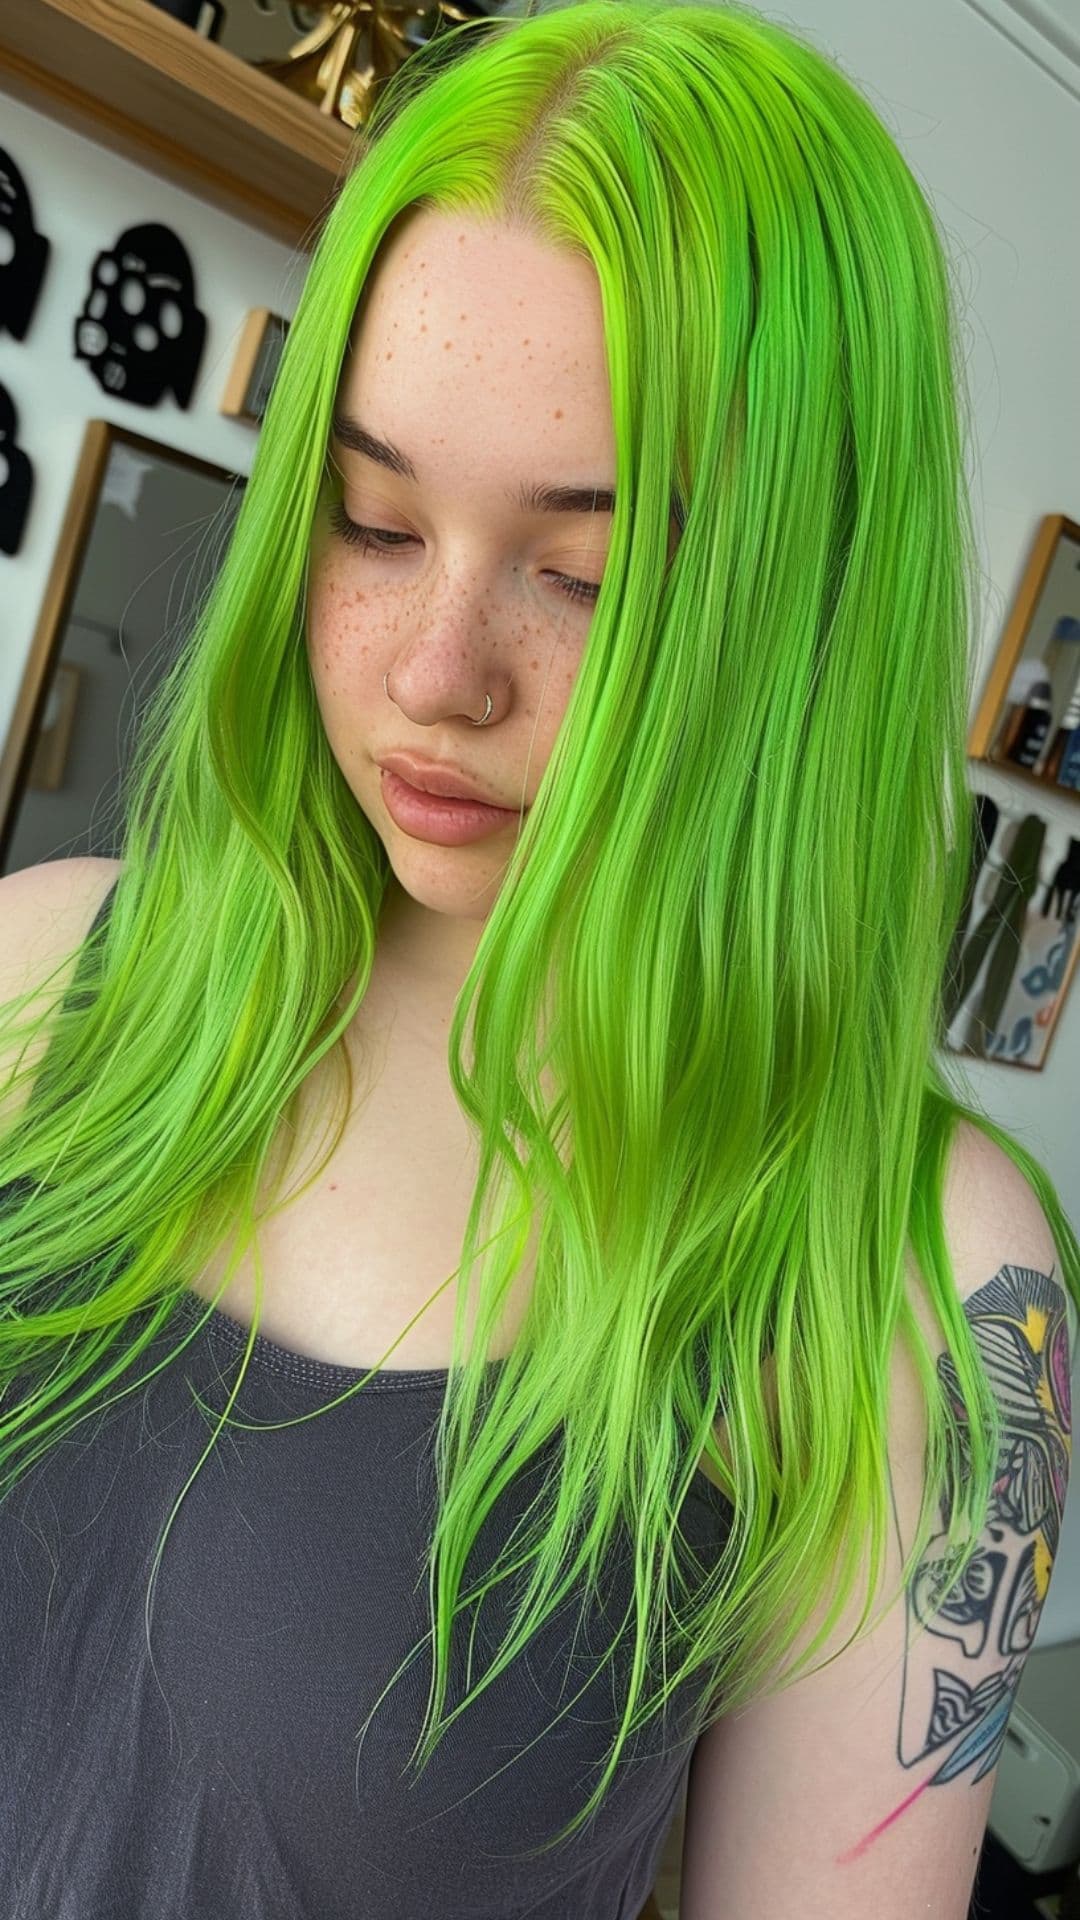 A young woman modelling a neon green hair.